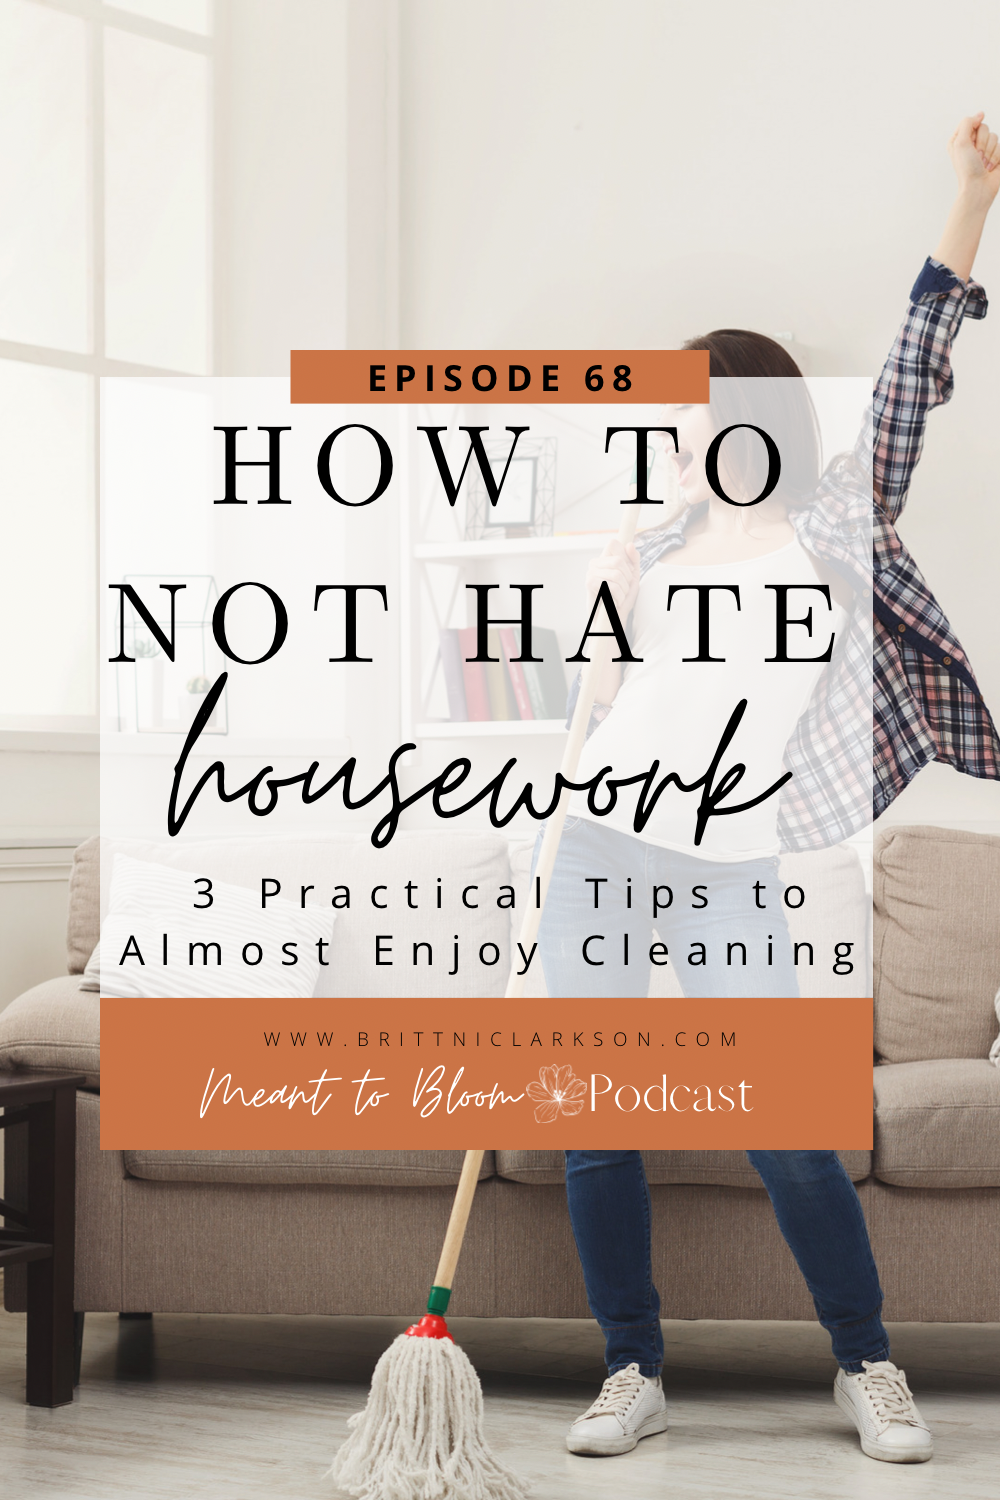 How to Not Hate Housework – 3 Practical Tips to Almost Enjoy Cleaning